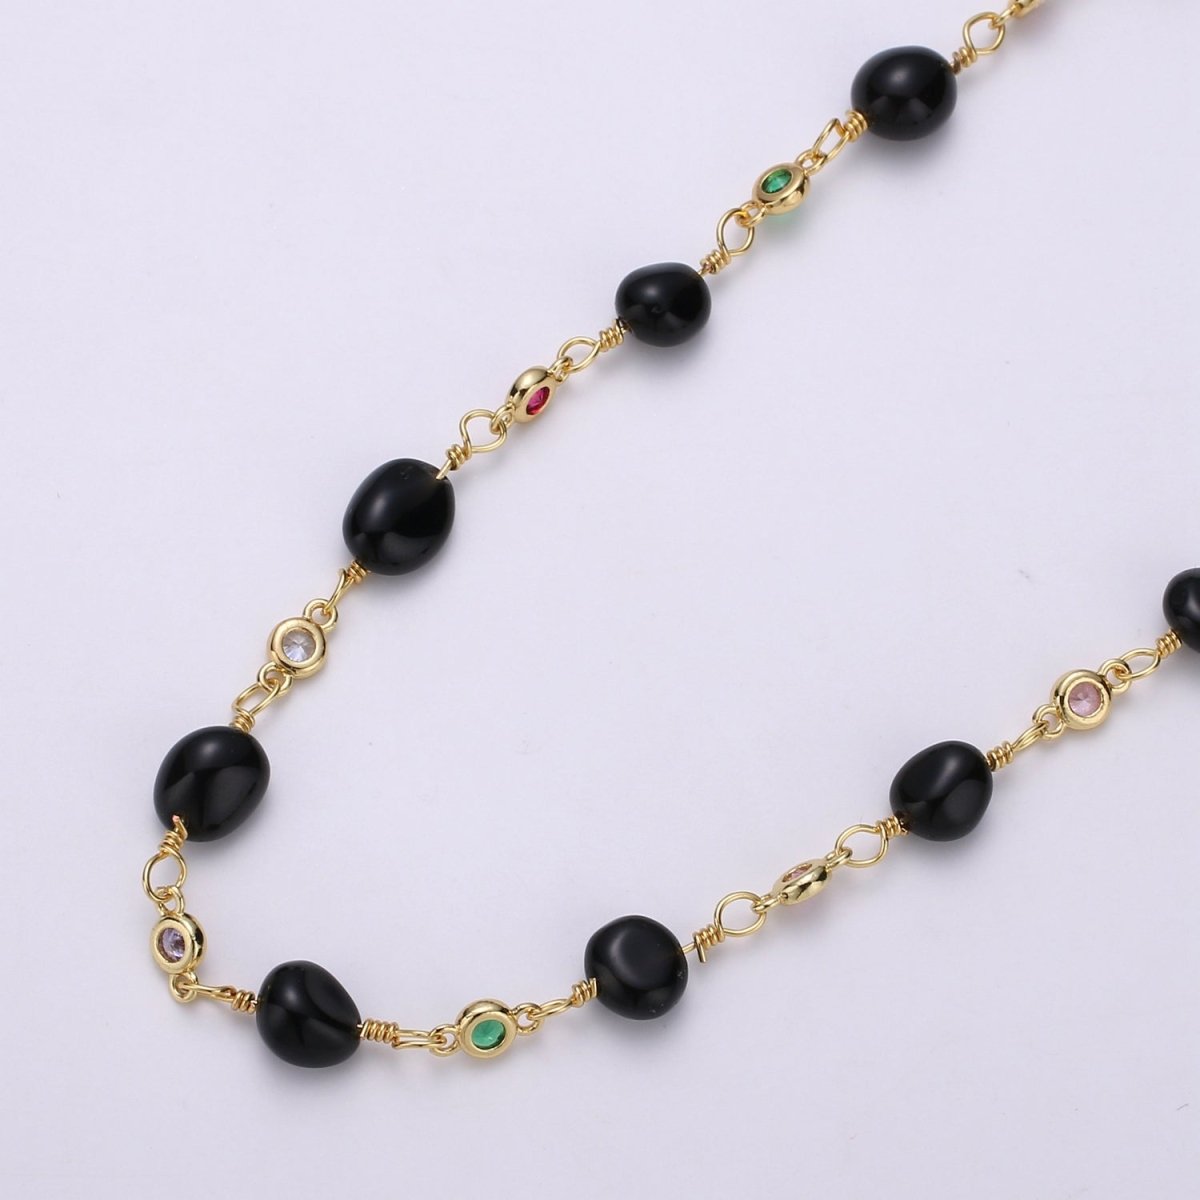 Onyx Micro Pave Charm 24K Gold Filled Chain by Yard, Cubic Round Charm Chain by Yard, Semiprecious Stone Onyx Chain | ROLL-329 Clearance Pricing - DLUXCA